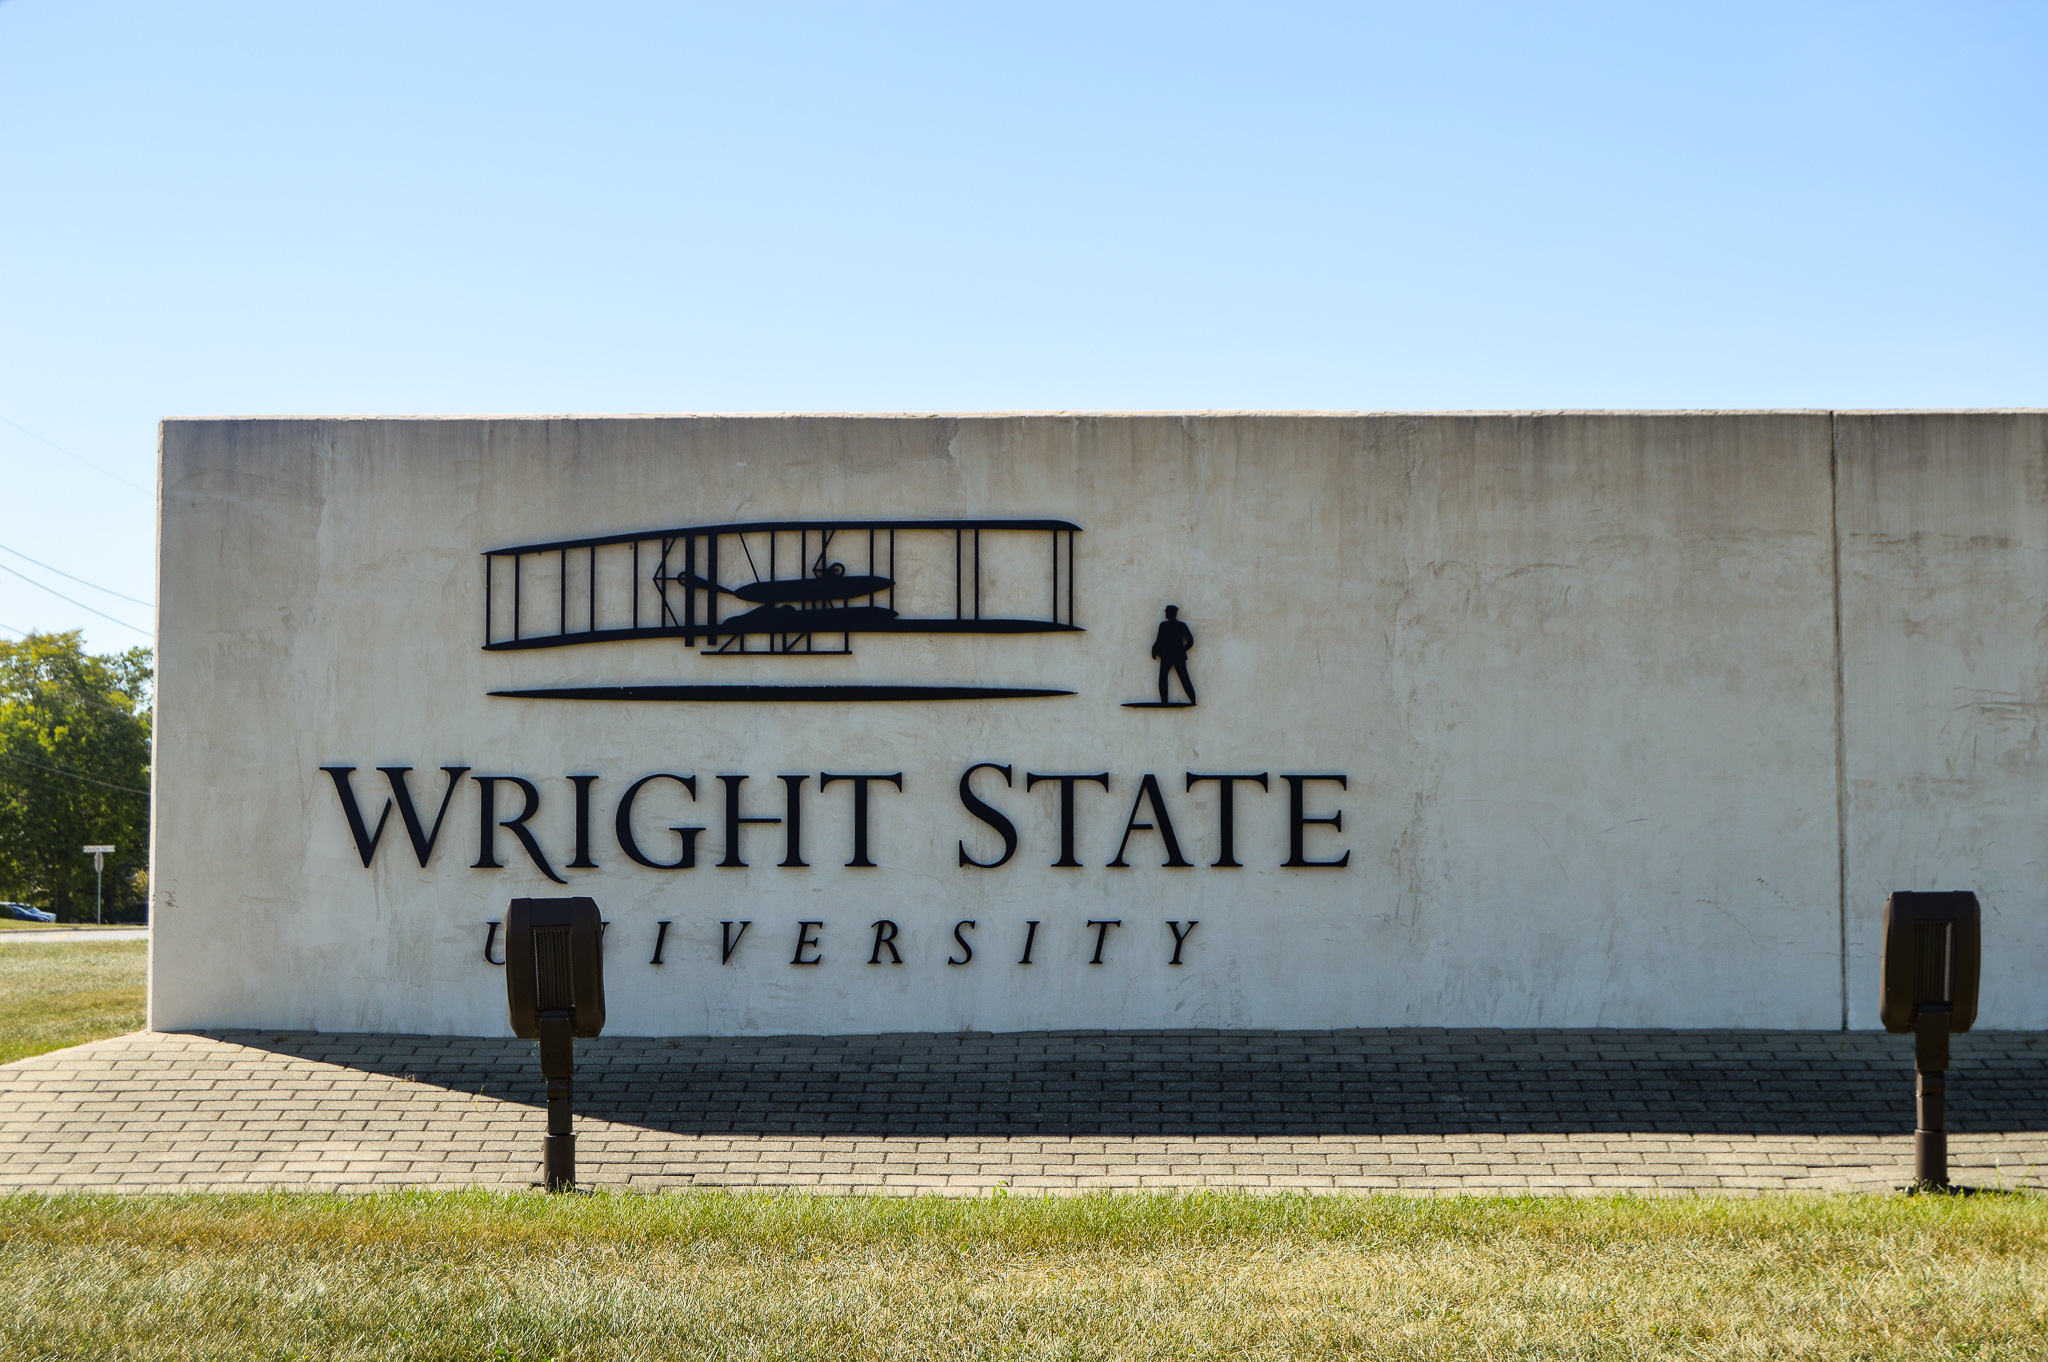 Wright State University | Photo by Cheyenne Waddell | Edited by Jessica Fugett | The Wright State Guardian